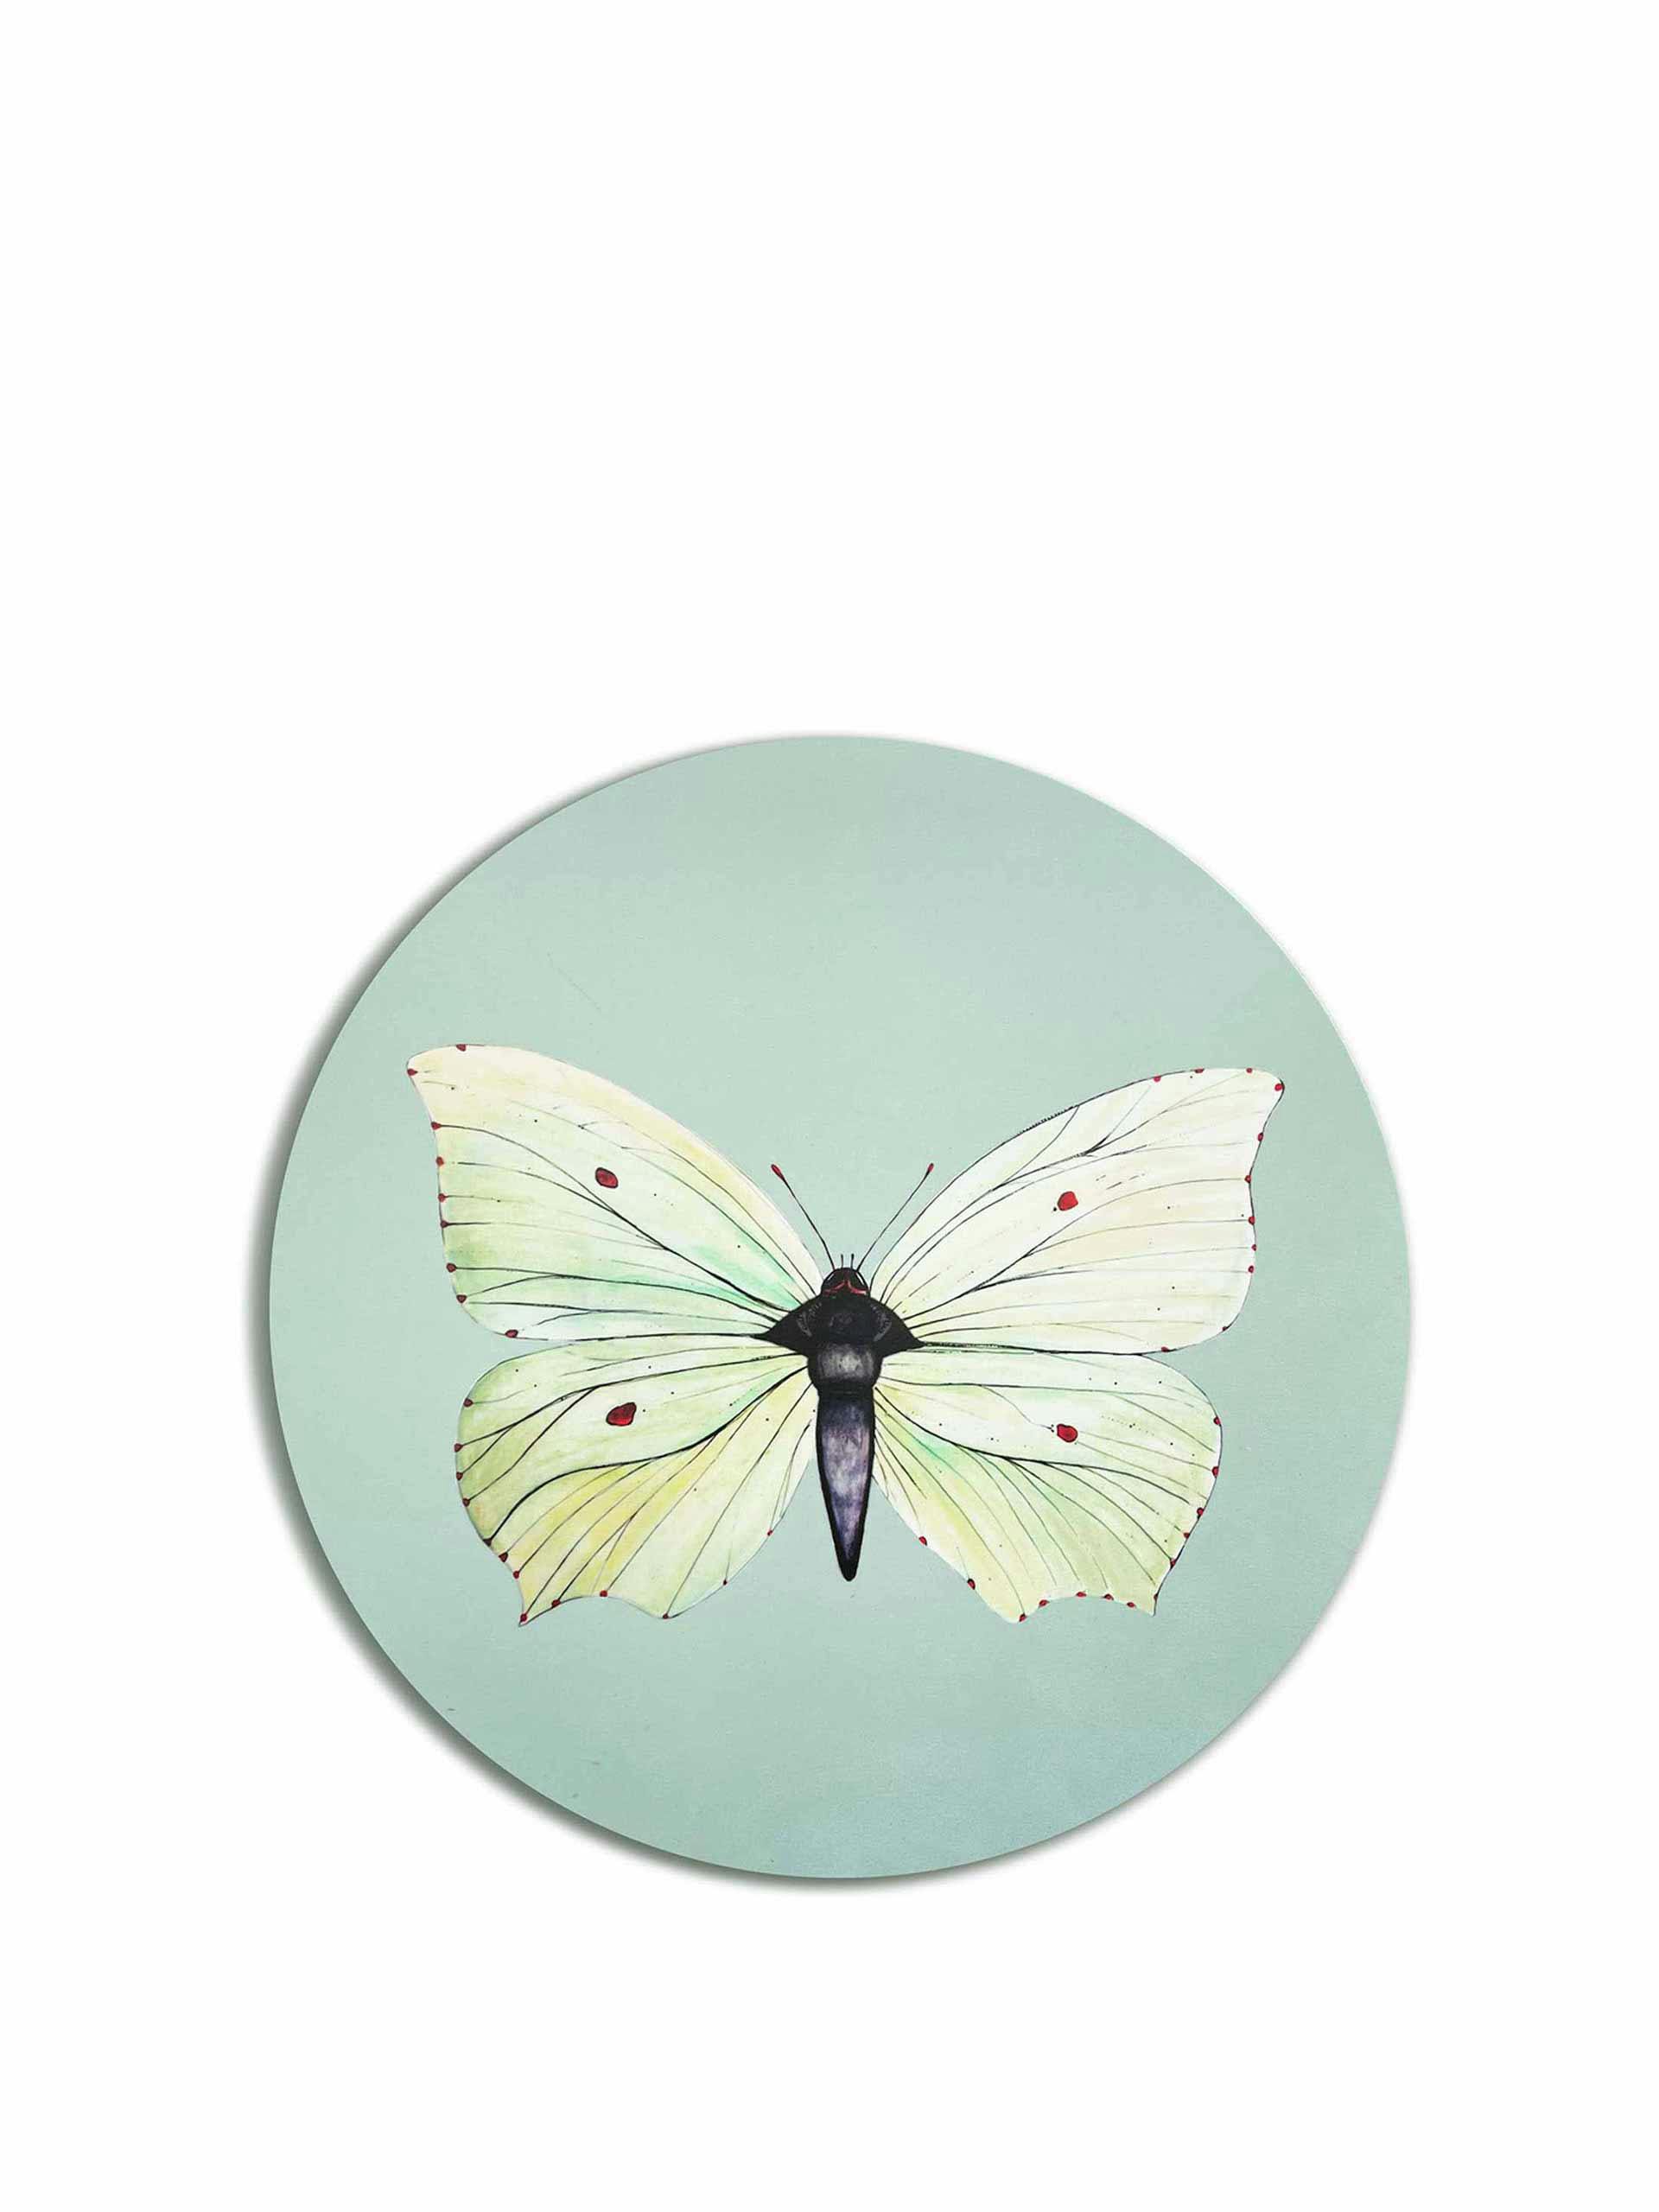 Icy blue brimstone butterfly coaster